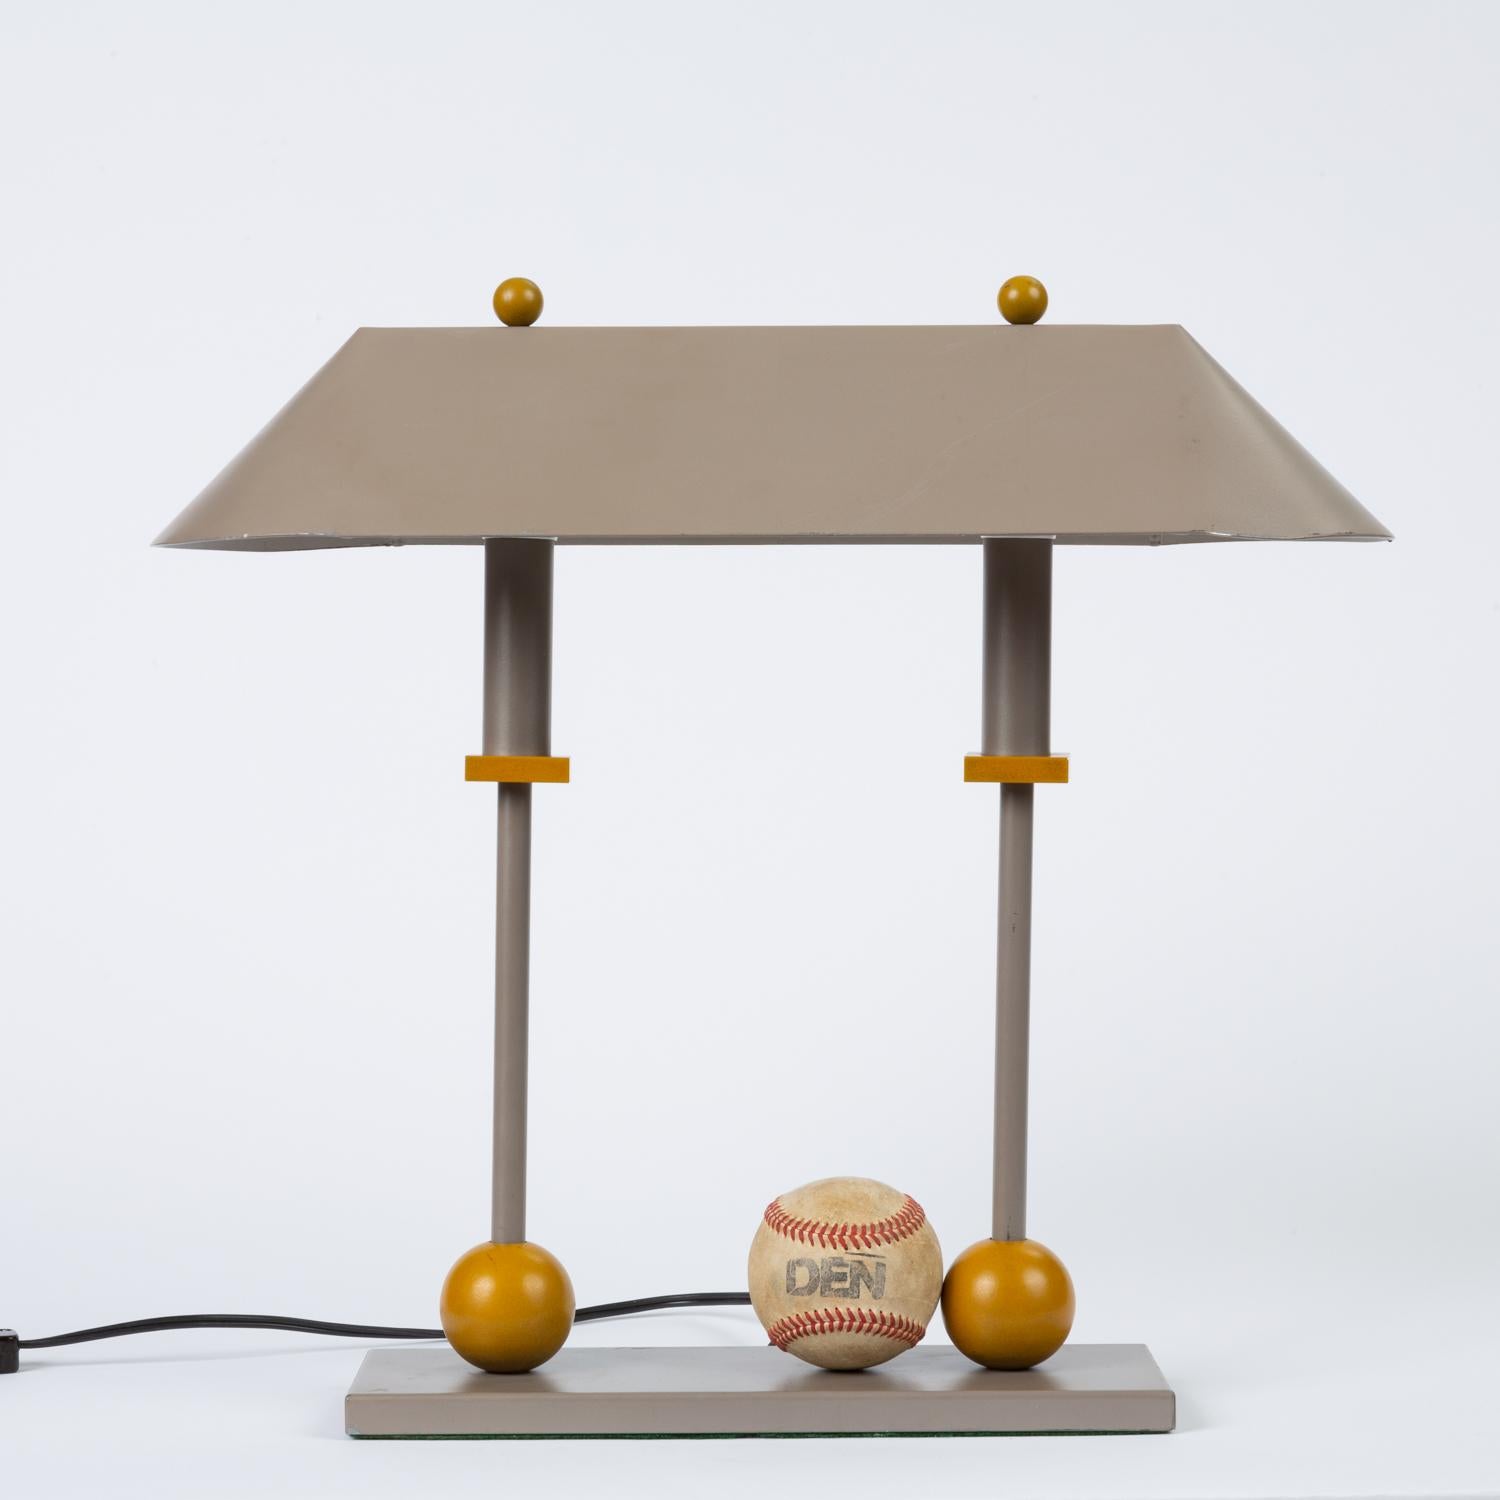 A Postmodern iteration of the Classic two-pillar banker’s lamp from lighting designer Robert Sonneman for George Kovacs. Designed in 1990, this piece has a triangular shade in putty-gray enameled aluminum, supported by two columns on a flat base.